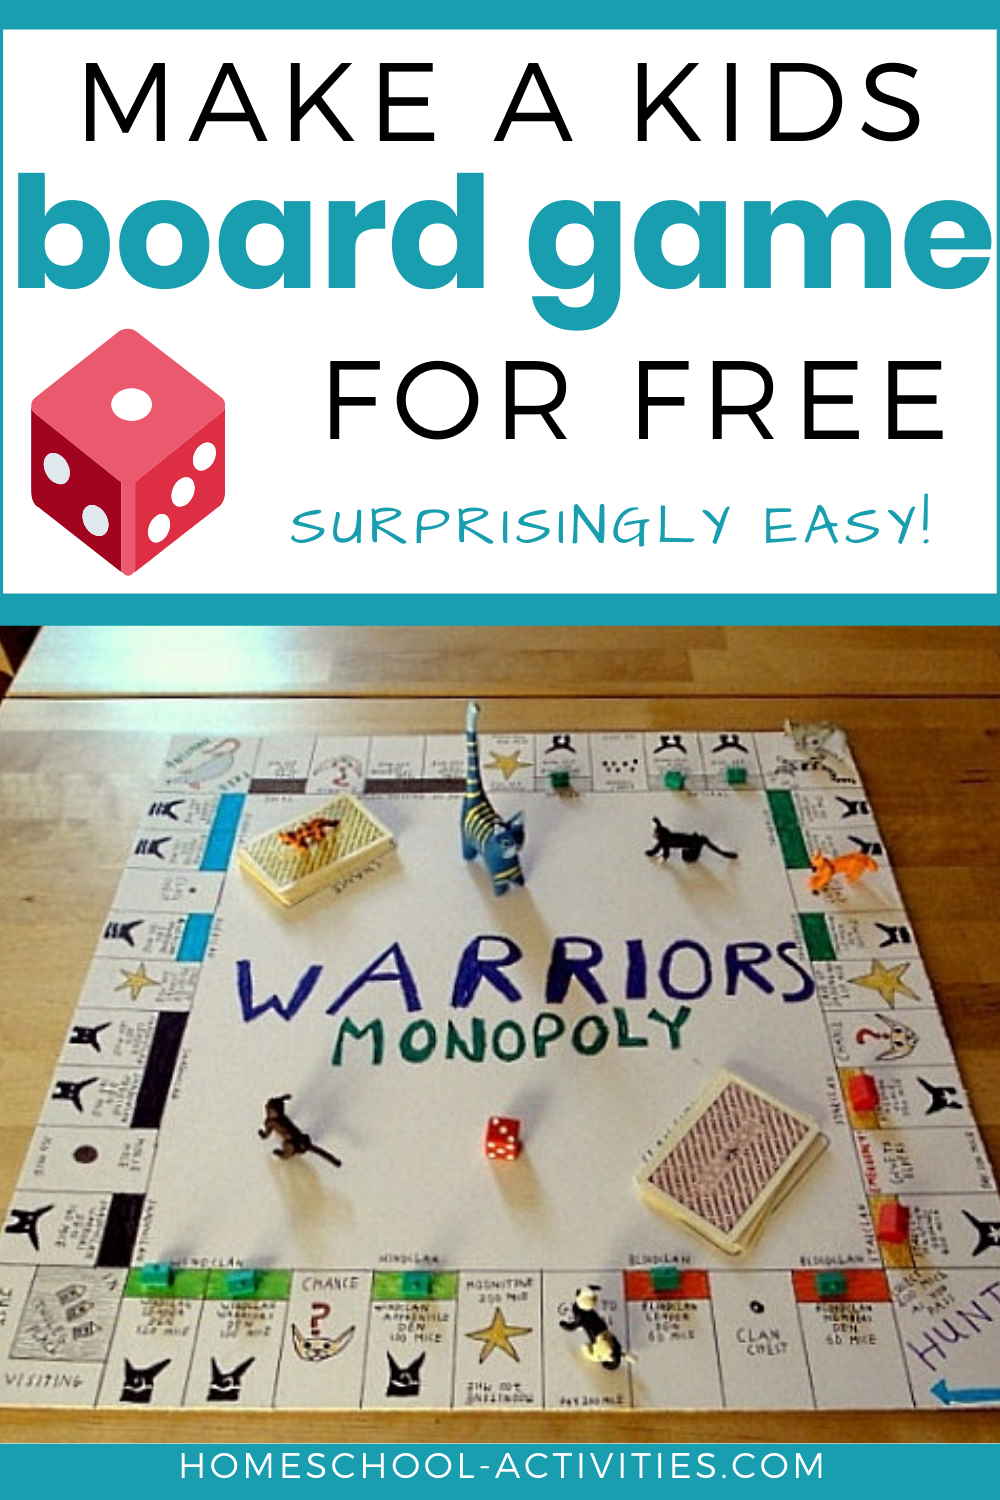 How to make a board game for kids